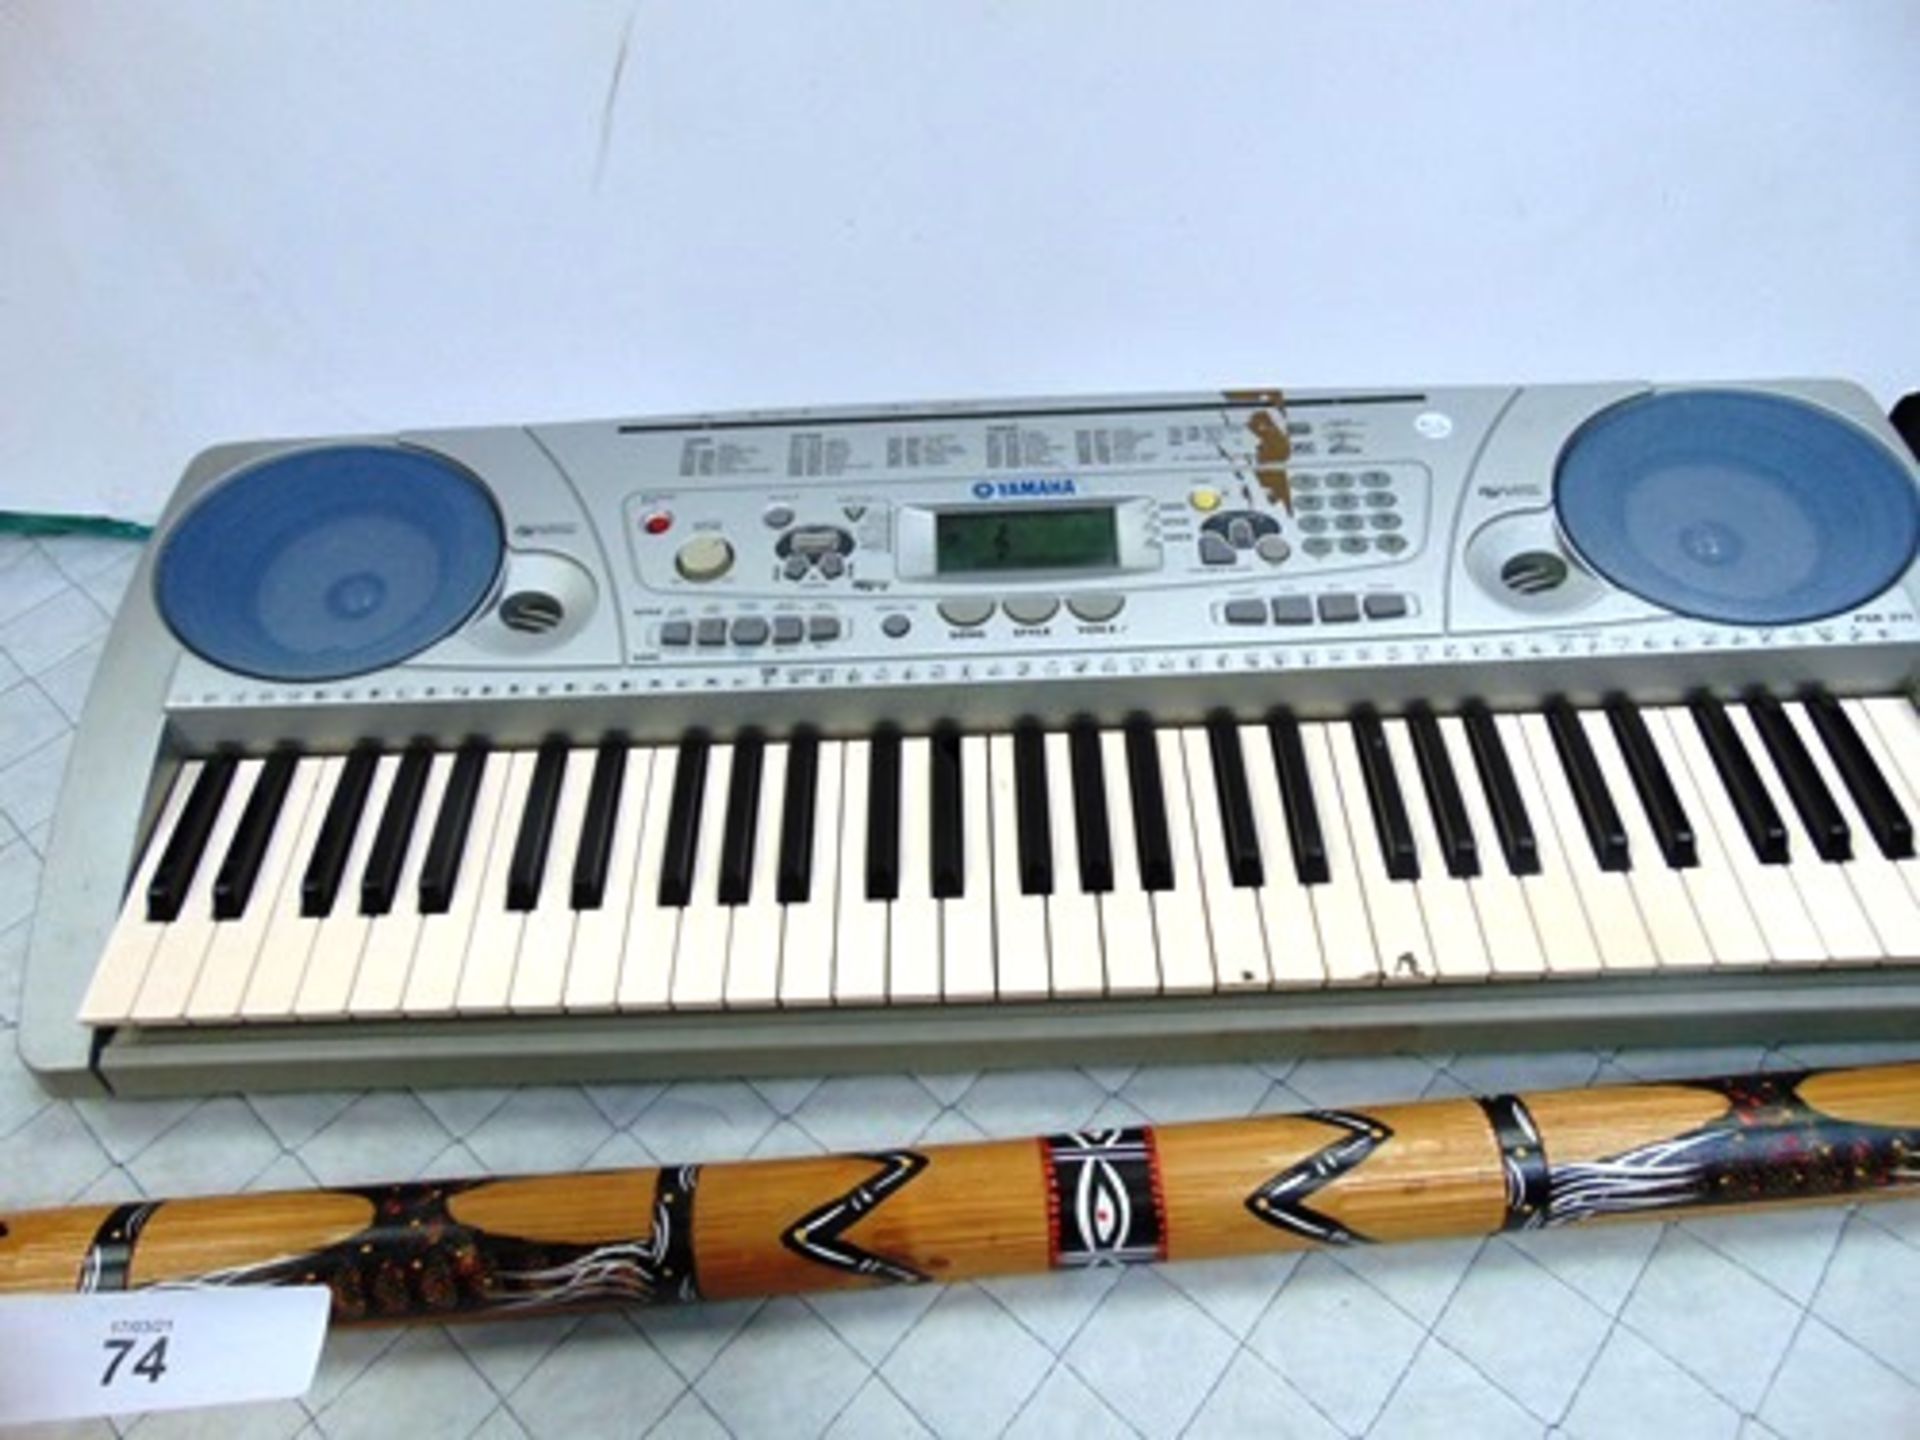 1 x Yamaha keyboard and stand, no power supply, second-hand, broken key, together with a musical - Image 3 of 5